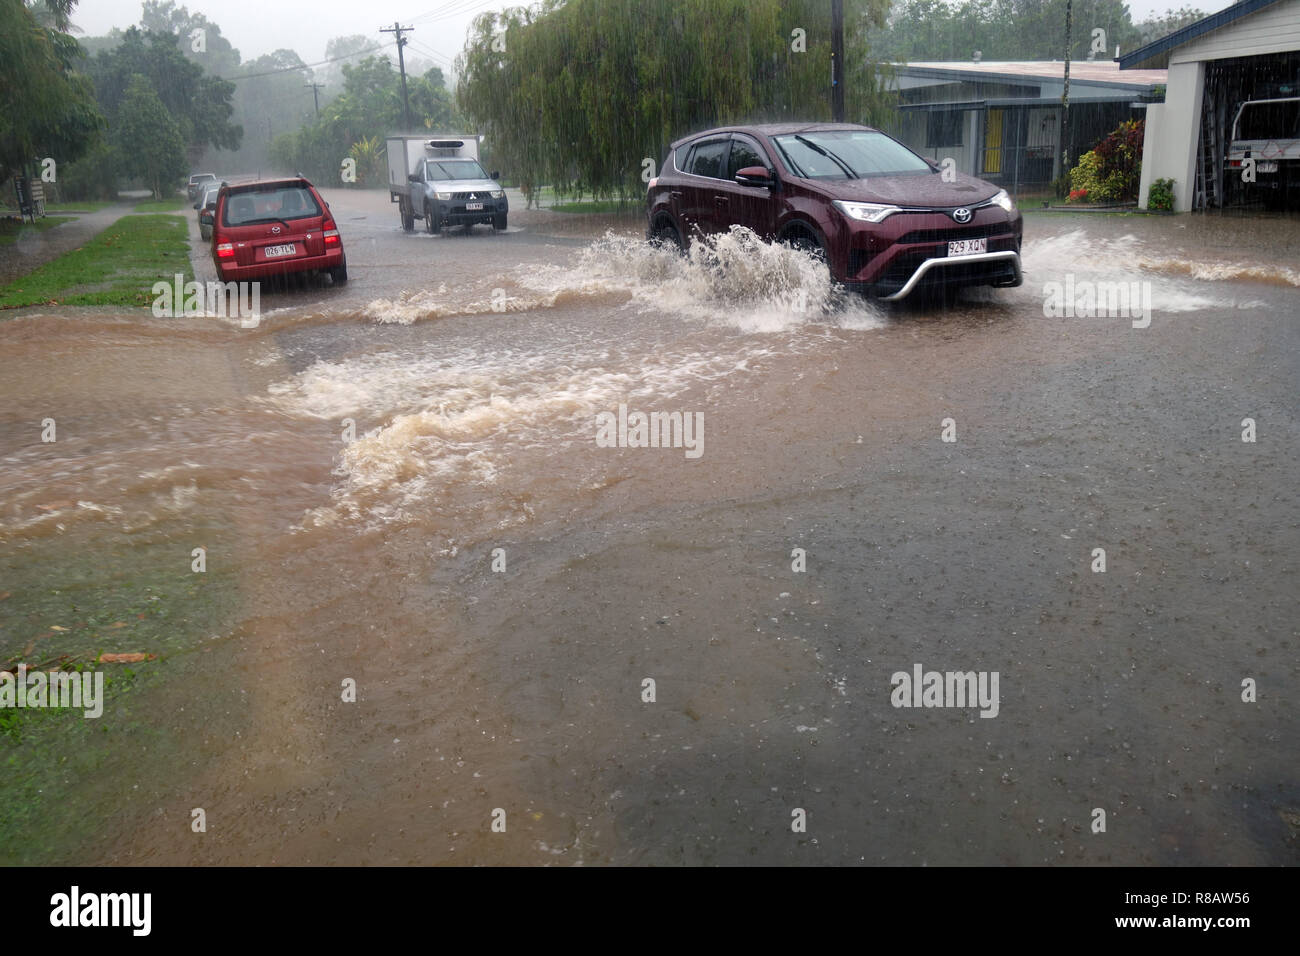 daytime Gå op samfund Cairns, Australia, 15 Dec 2018. First storms from Tropical Cyclone Owen  have caused localised flash flooding in far north Queensland. Cars driving  through floodwaters in the suburb of Edge Hill, Cairns, Queensland,